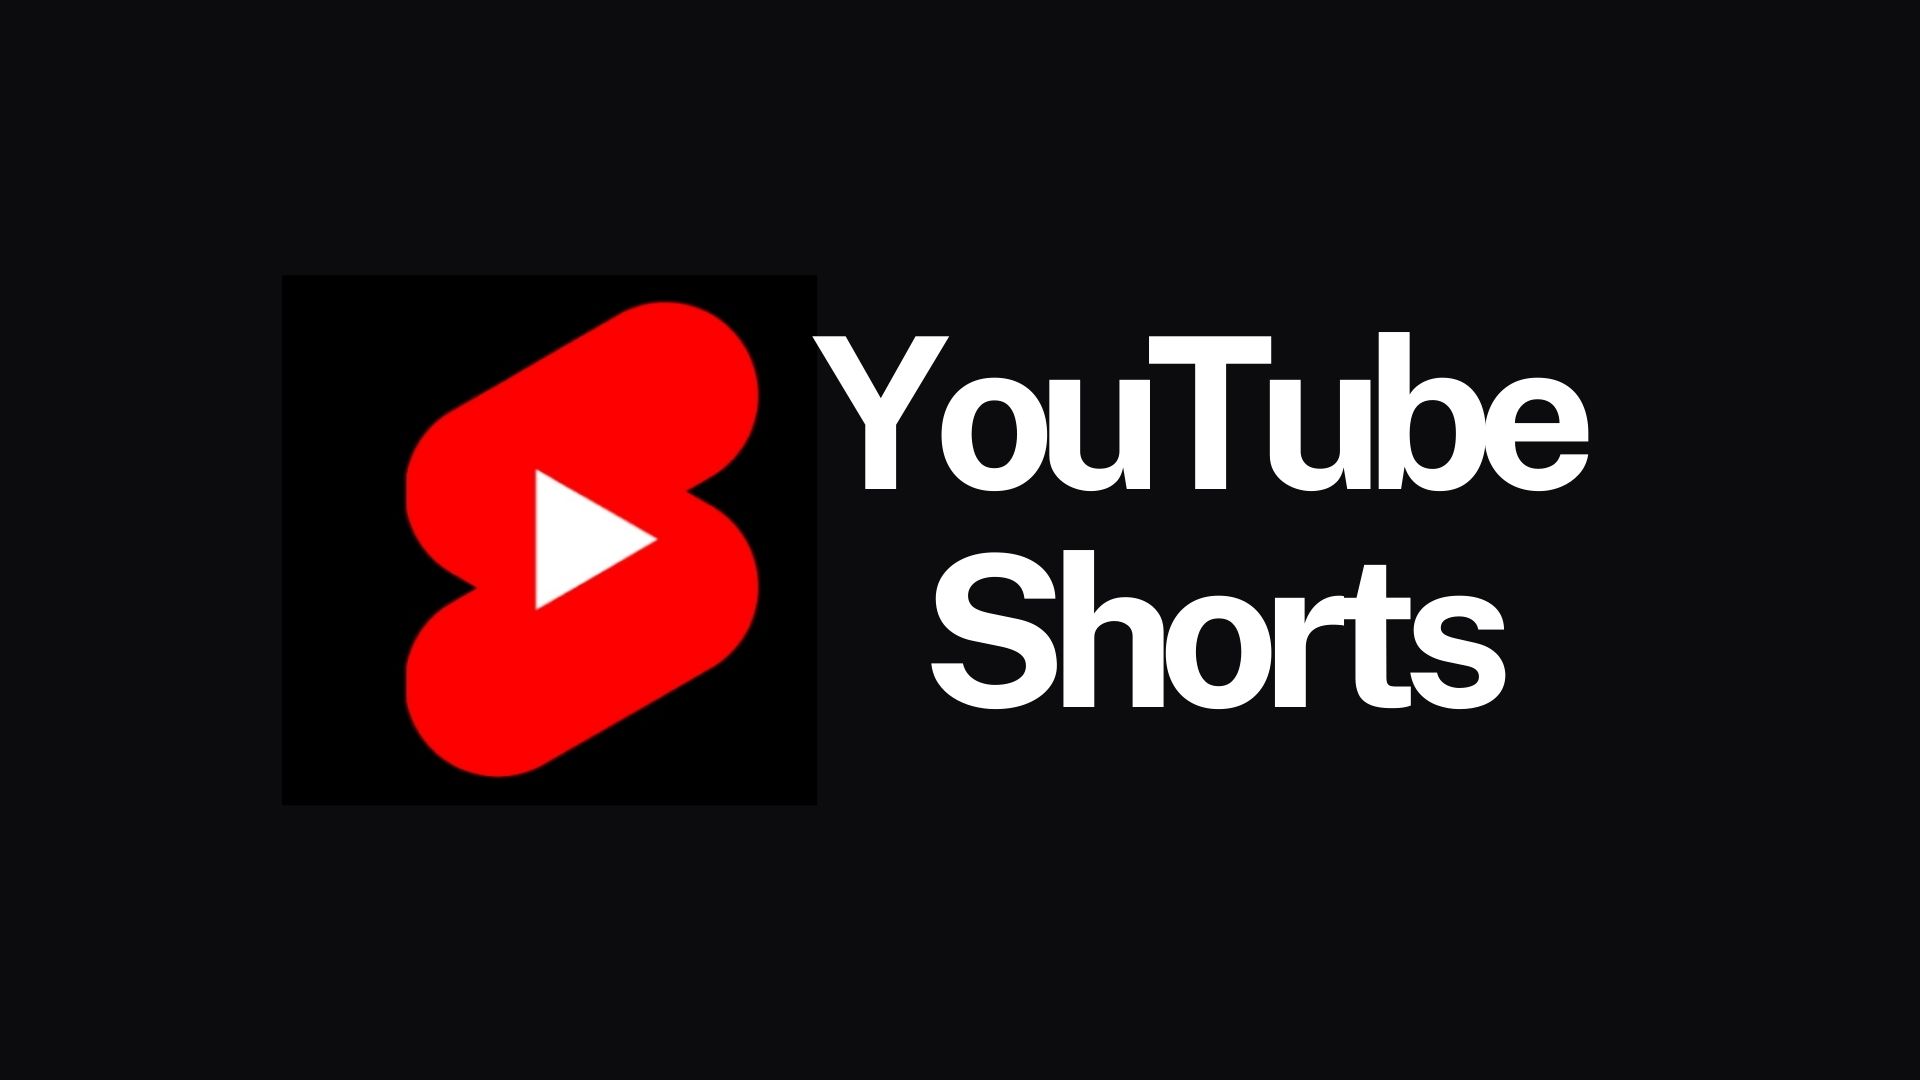 What Are YouTube Shorts? A Short-form Video Experience